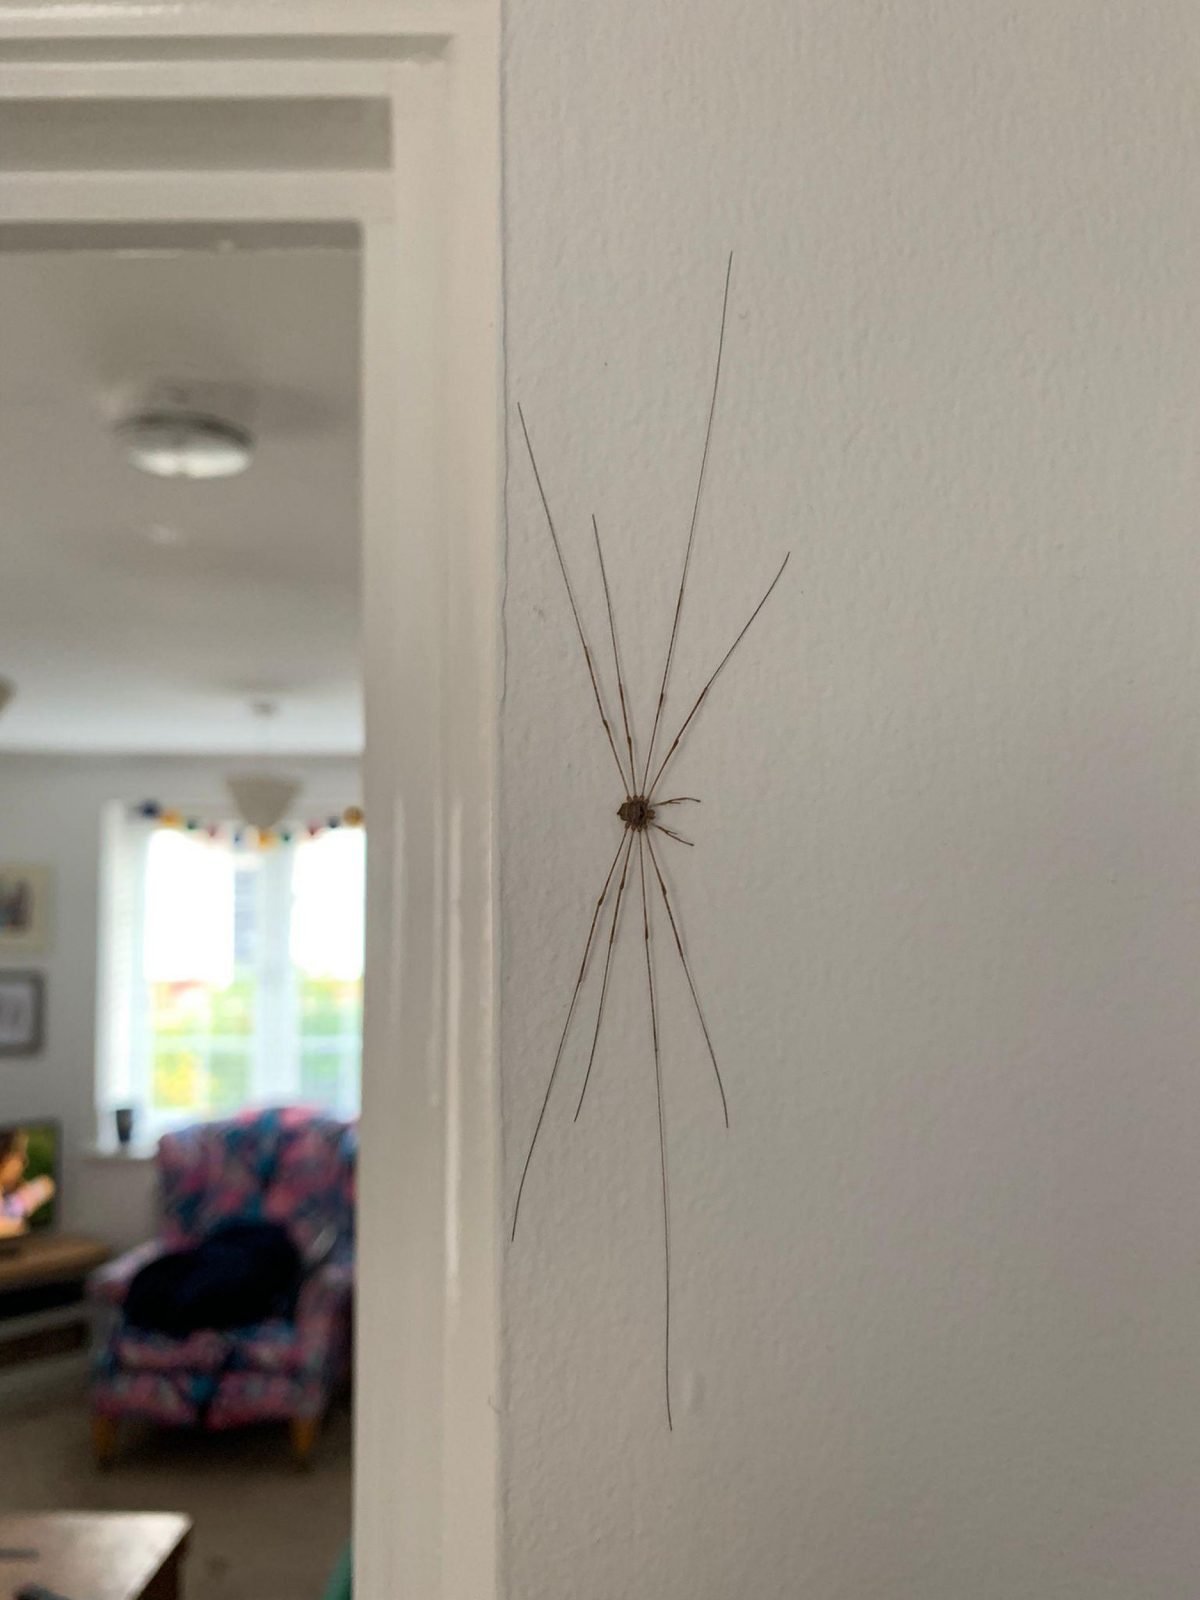 The massive daddy long legs, found by Alina on her kitchen wall.